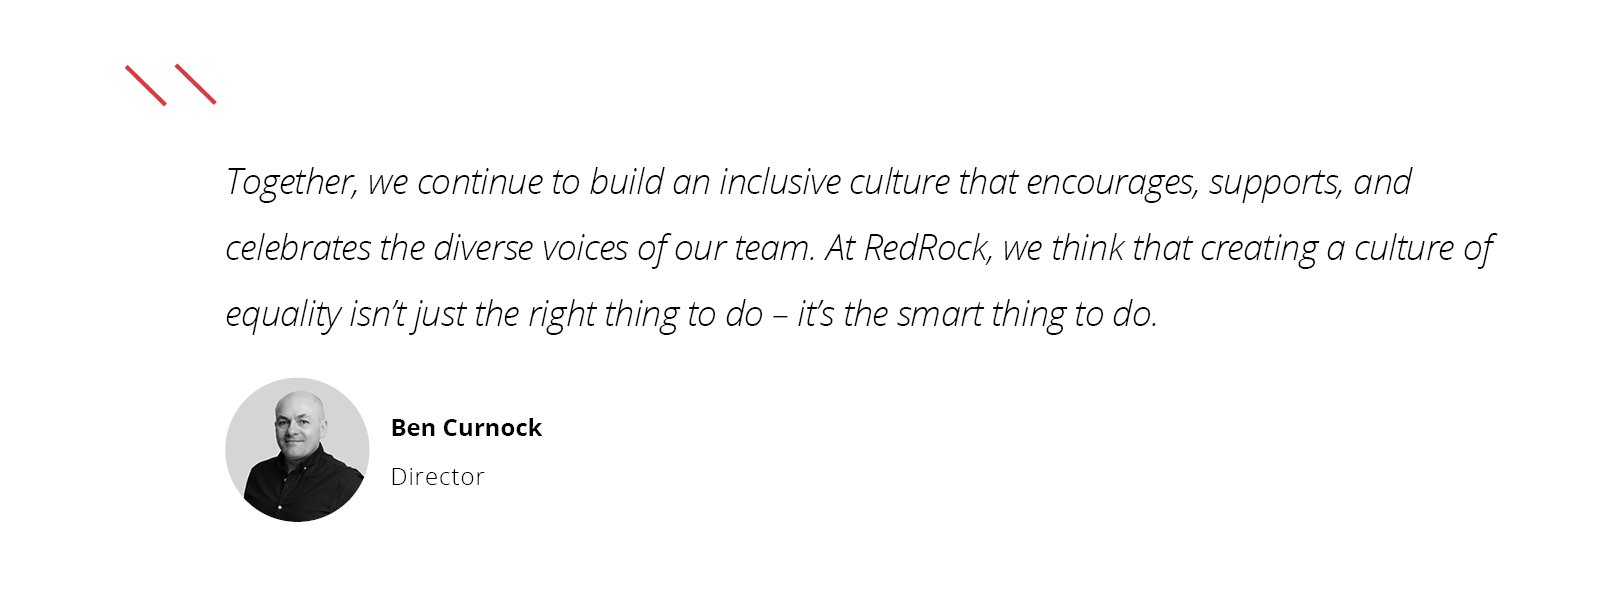 “Together, we continue to build an inclusive culture that encourages, supports, and celebrates the diverse voices of our team. At RedRock, we think that creating a culture of equality isn’t just the right thing to do – it’s the smart thing to do.” BEN CURNOCK, DIRECTOR